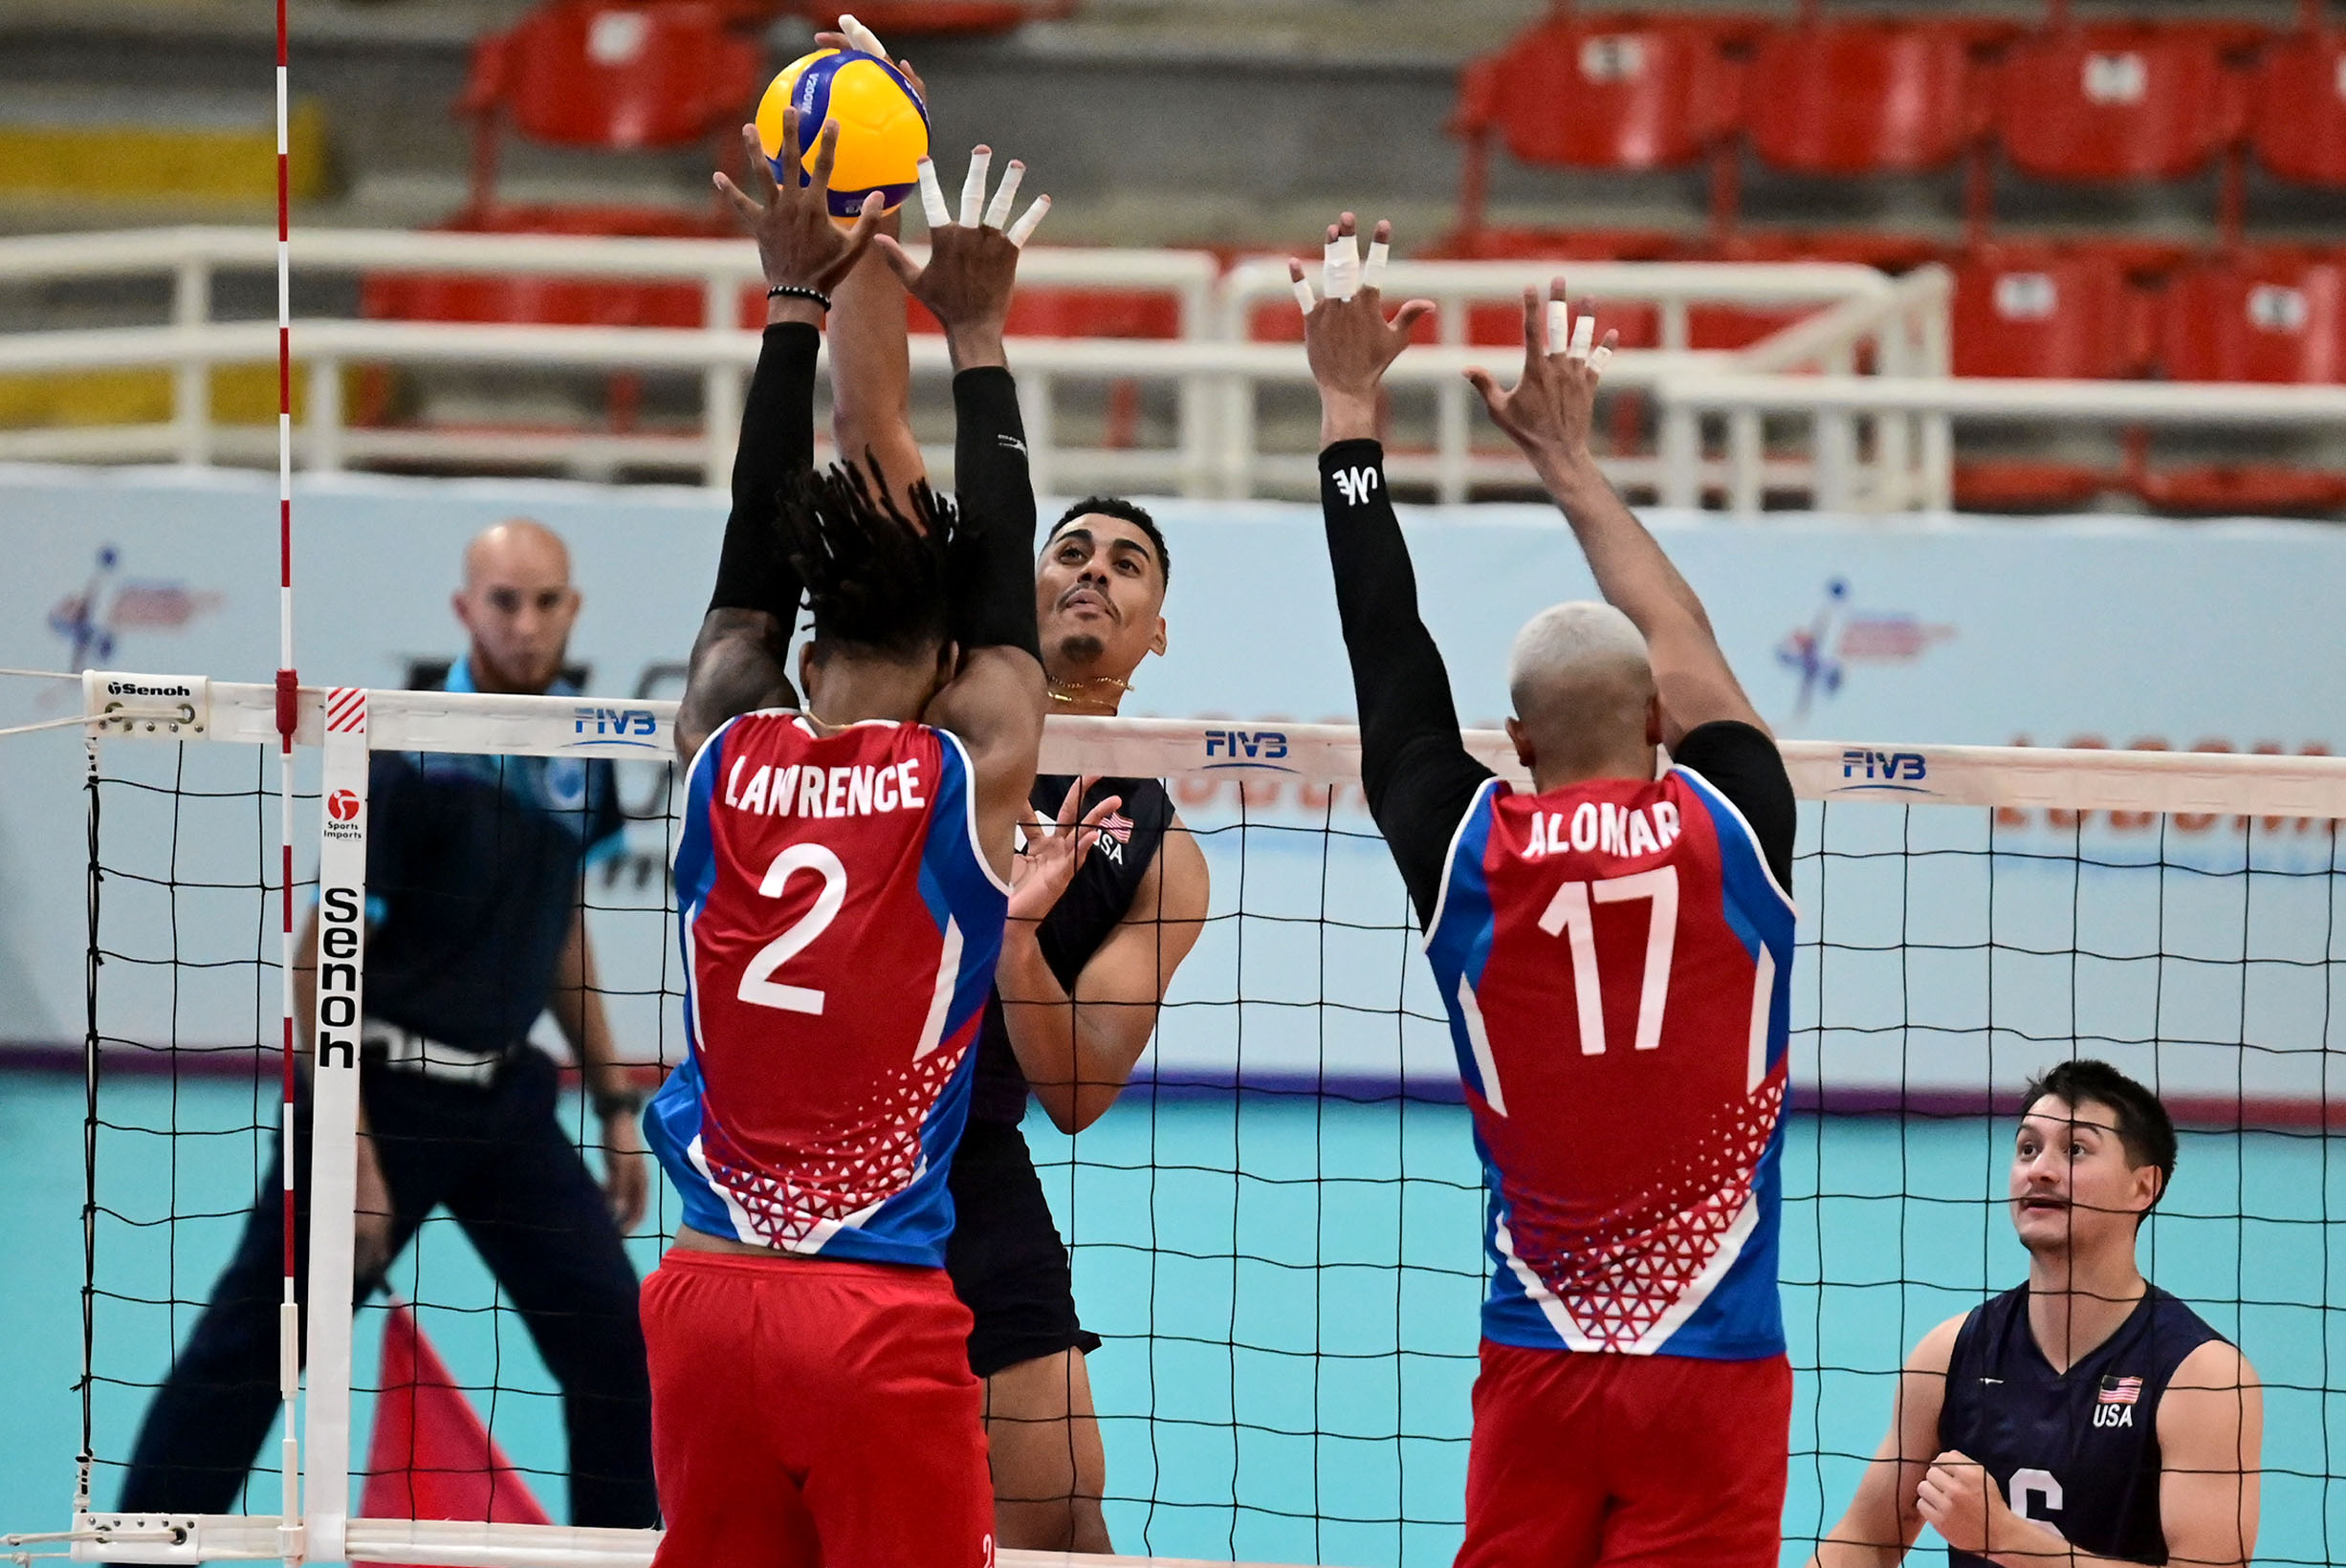 United States defeats Puerto Rico in  an exciting match